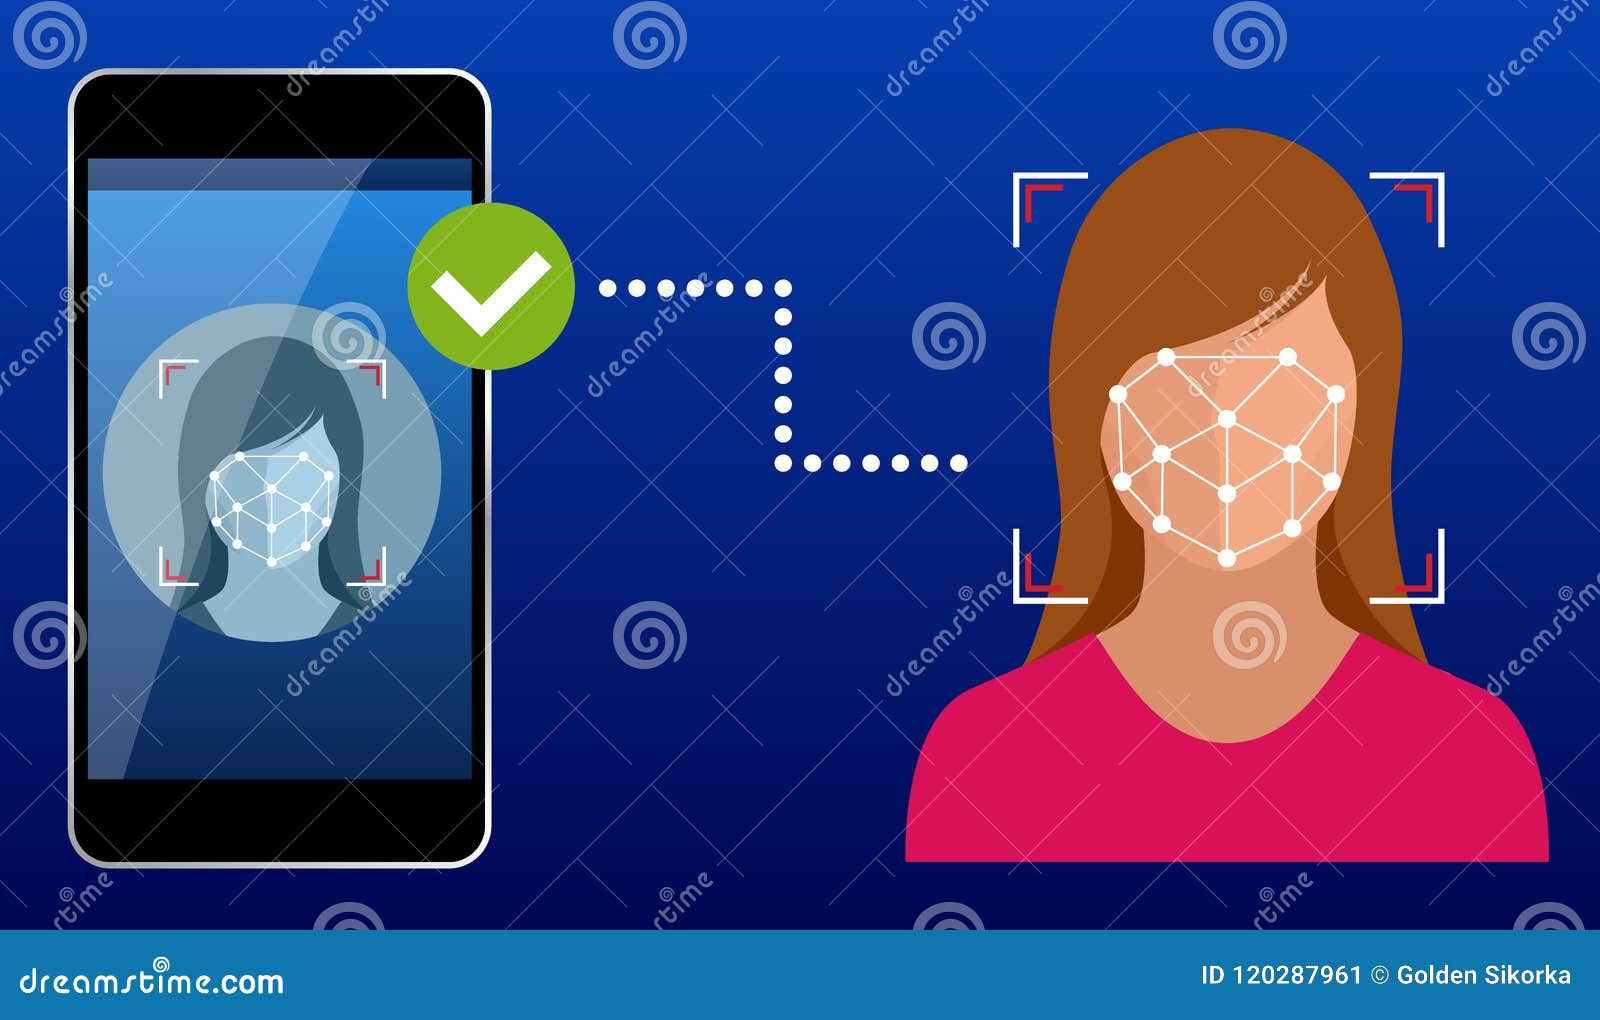 unlocking smartphone with biometric facial identification, biometric identification, facial recognition system concept